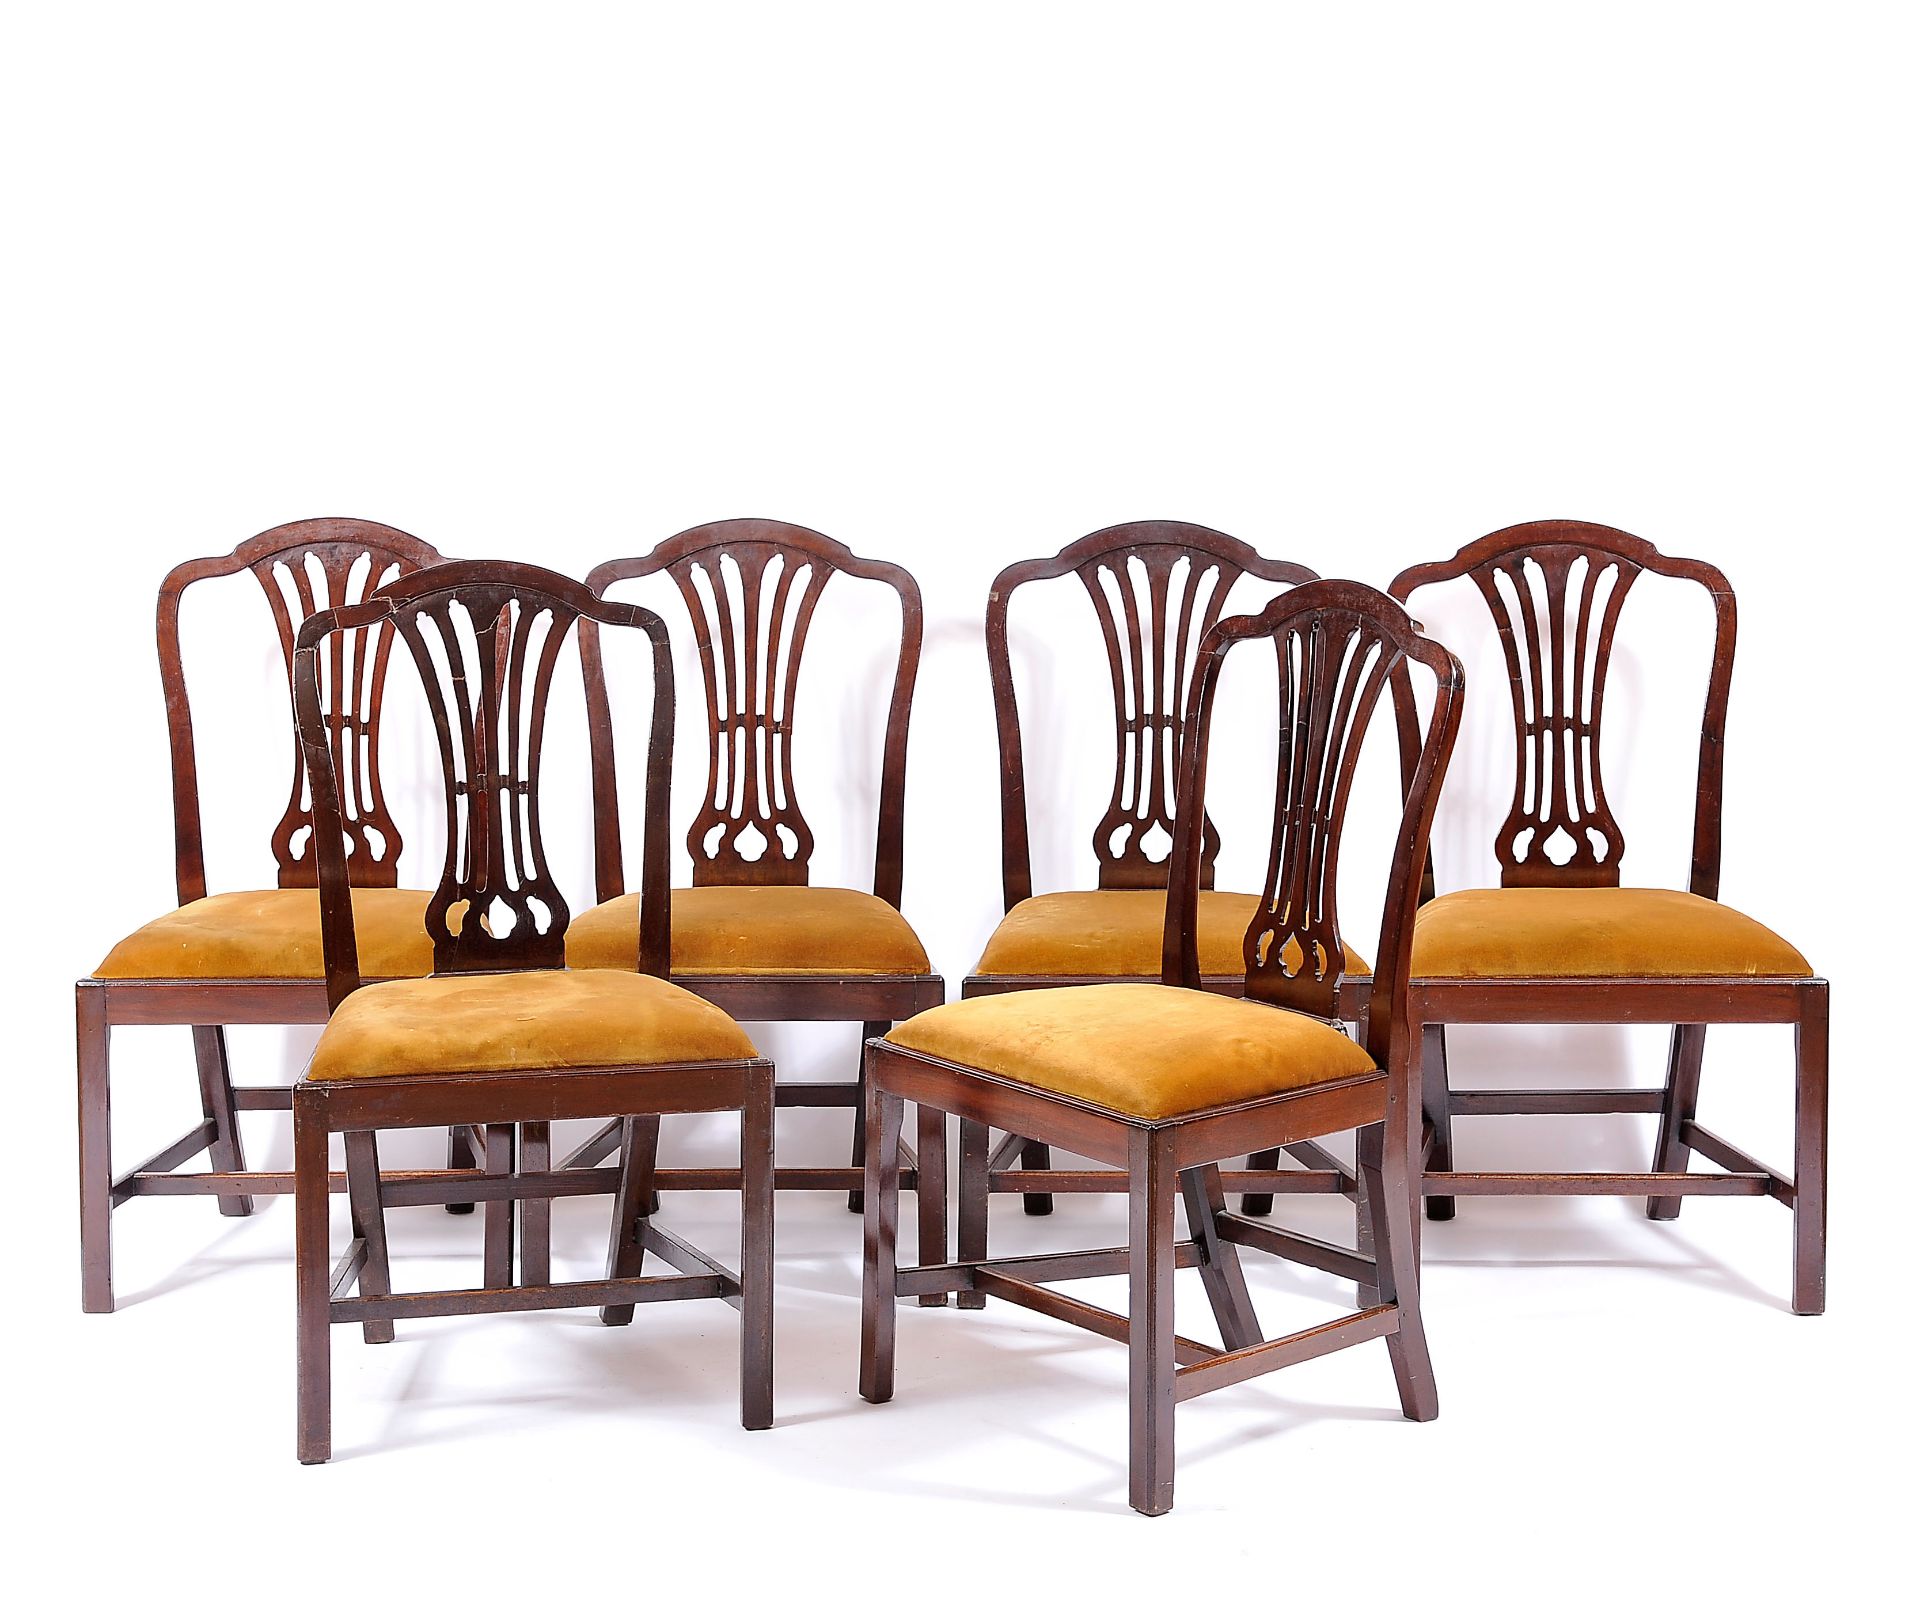 A Set of 12 Chairs, Chippendale style, walnut, scalloped and pierced back splats, English, 18th/19th